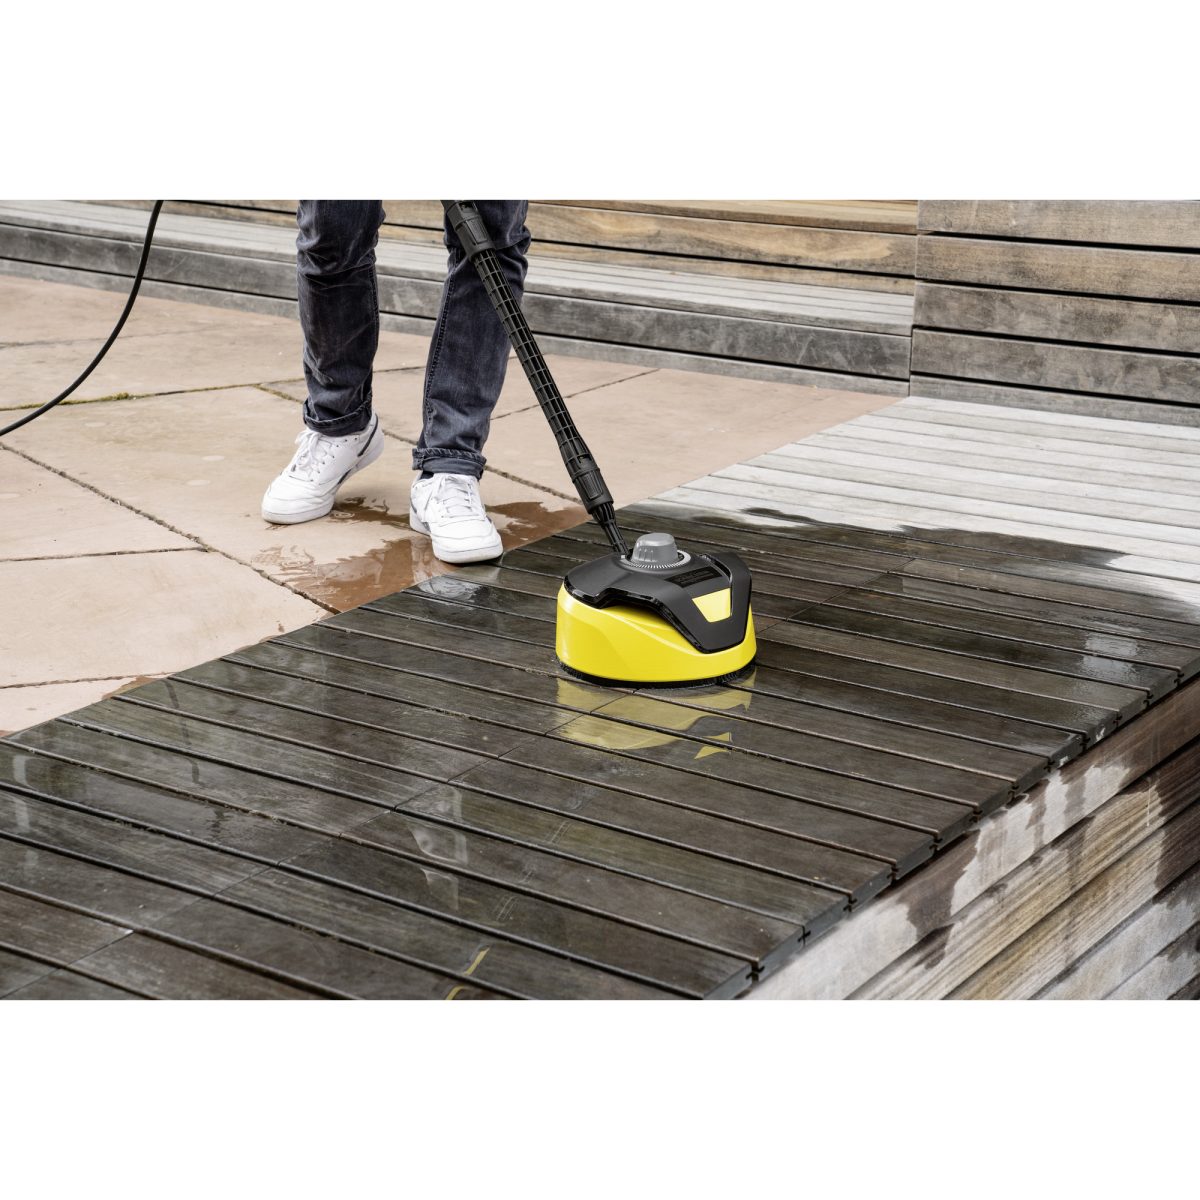 T 5 T-Racer Surface Cleaner